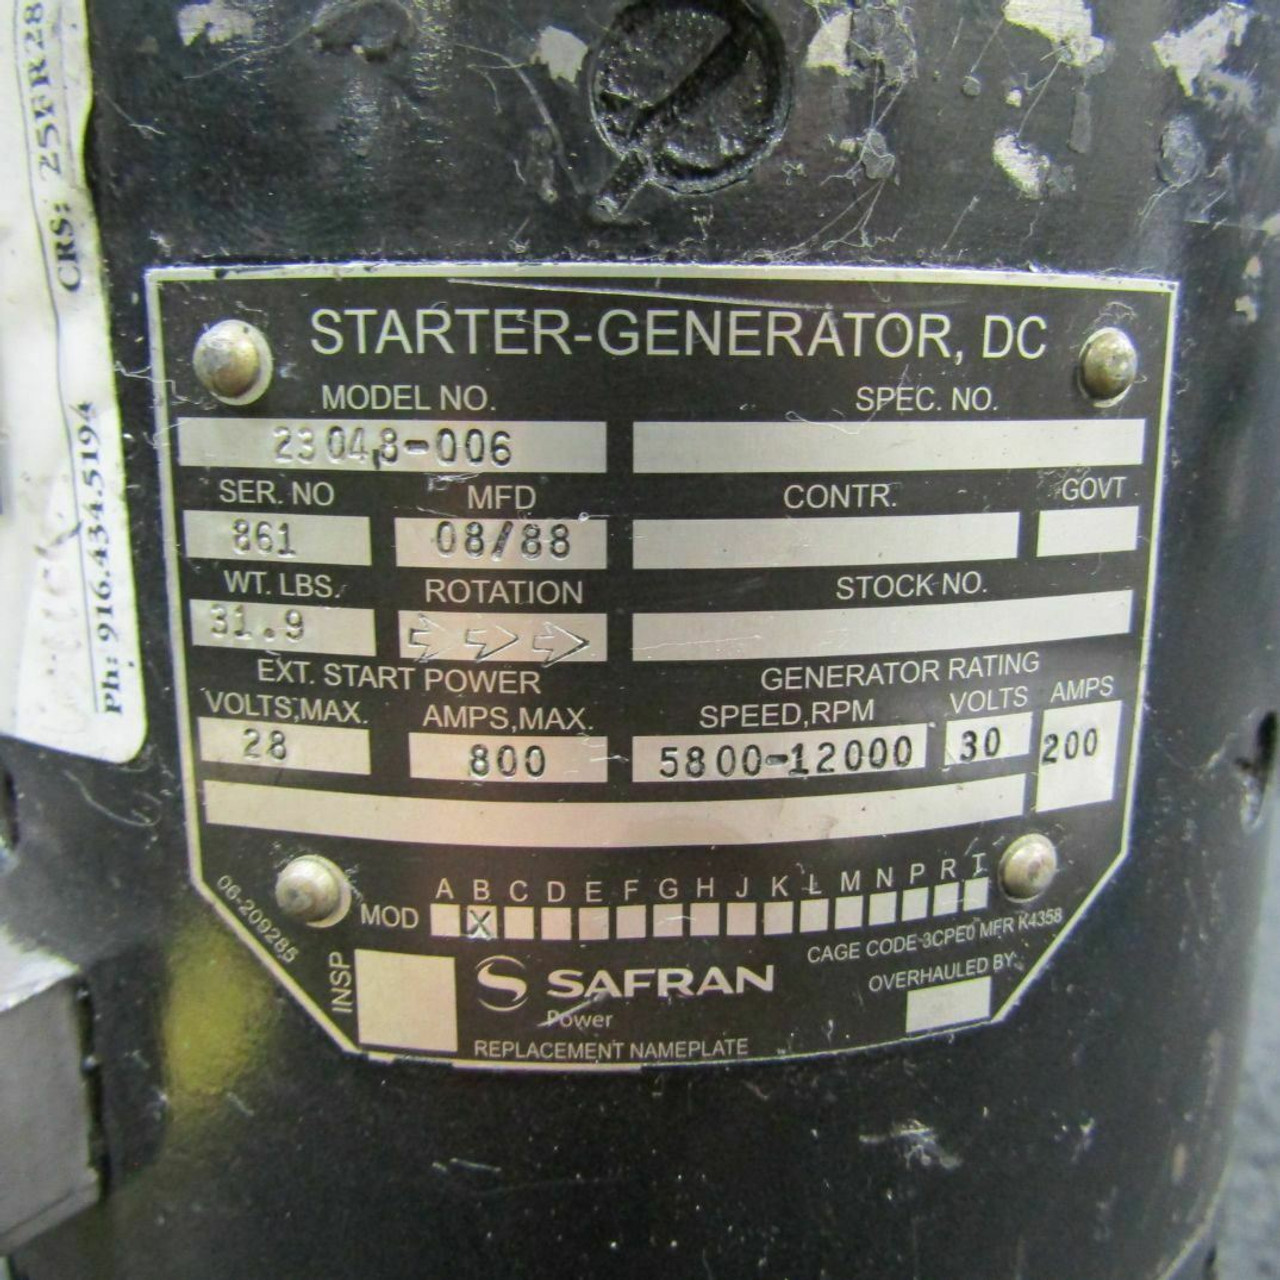 Starter Generator PA-31T TAG)(C20) YELLOW SERVICEABLE Safran 23048-006 (W/ Piper